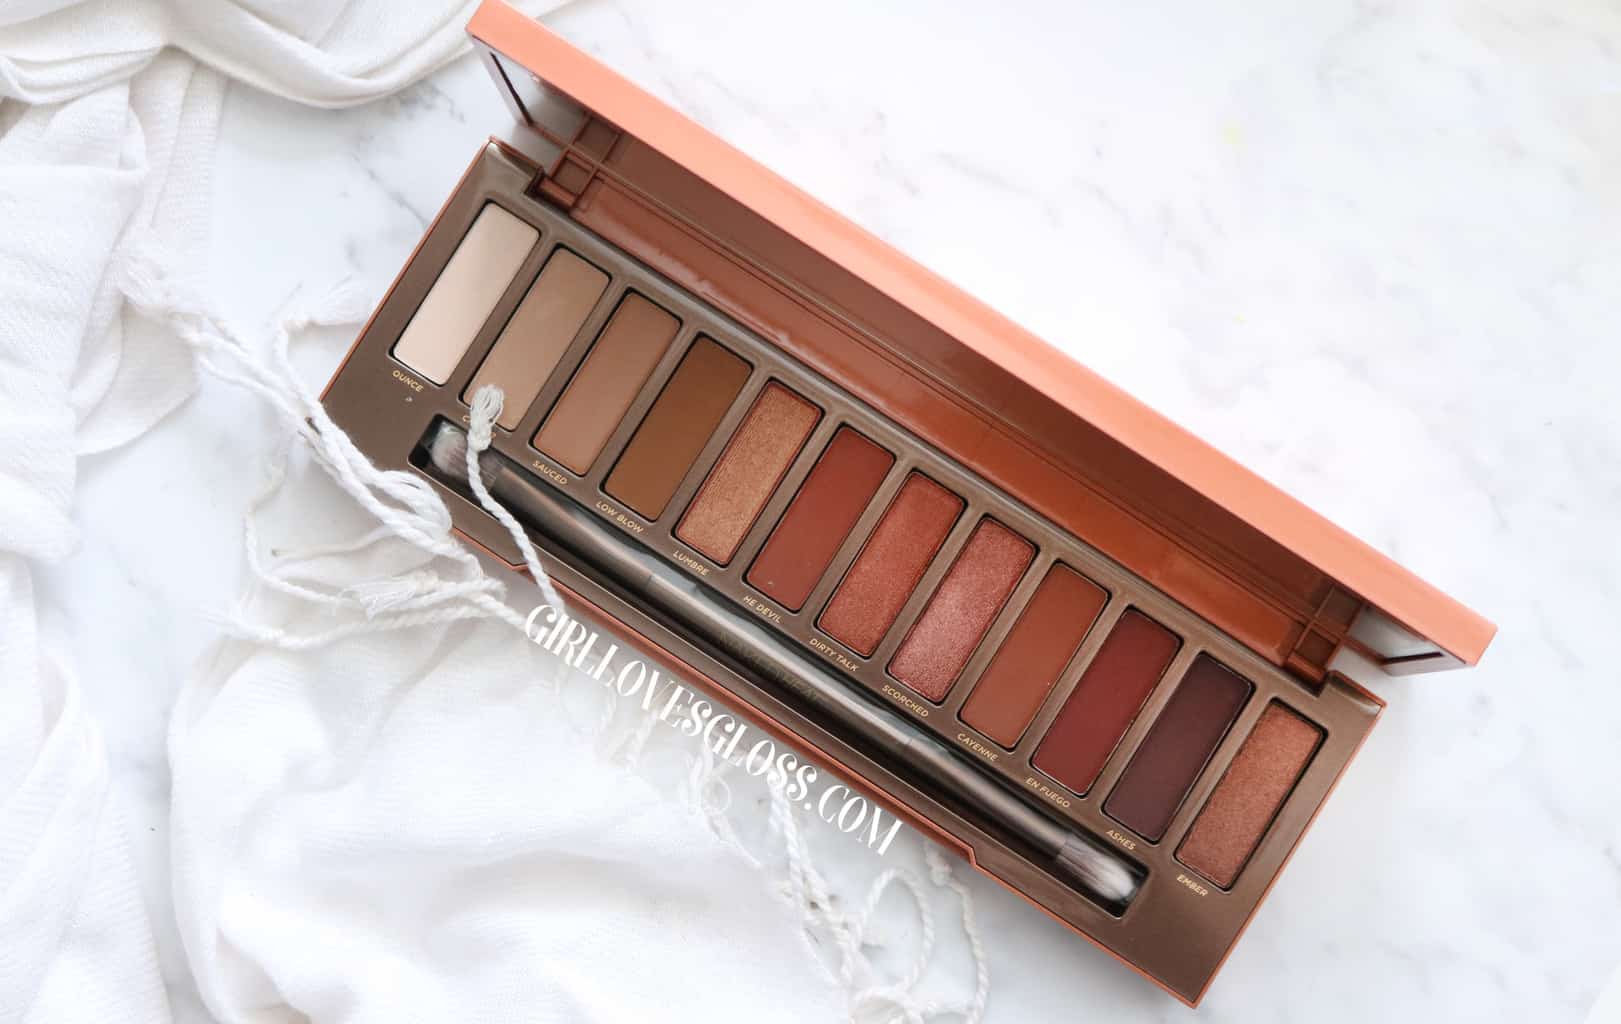 Urban Decay Naked Heat Collection Review and Swatches